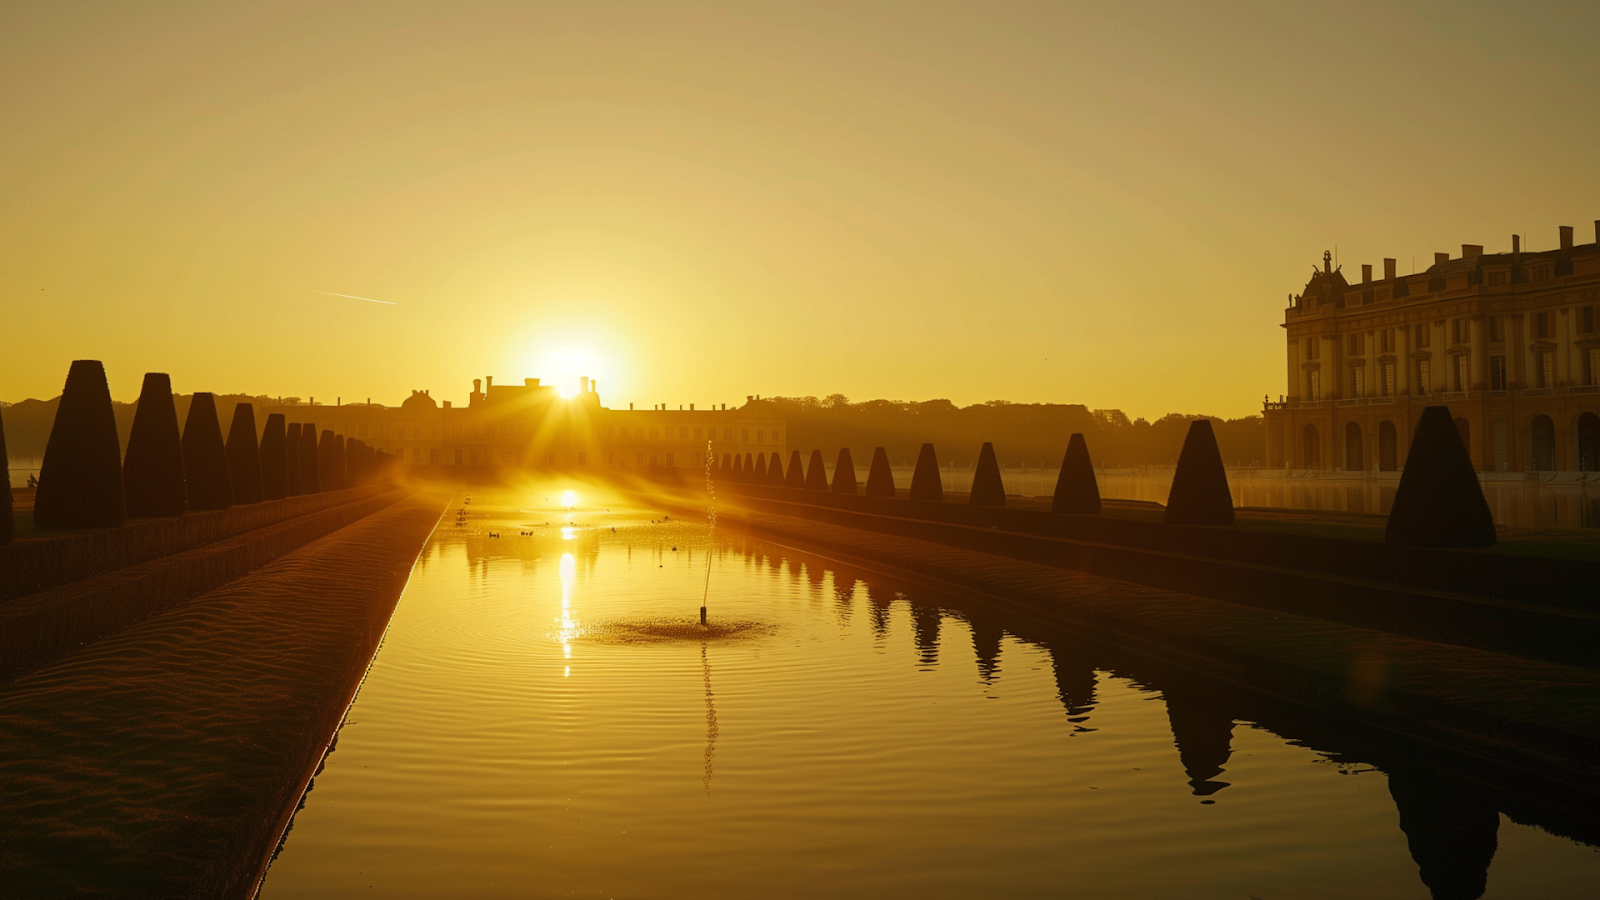 Sunrise over Versailles gardens with palace silhouette and illuminated fountains.